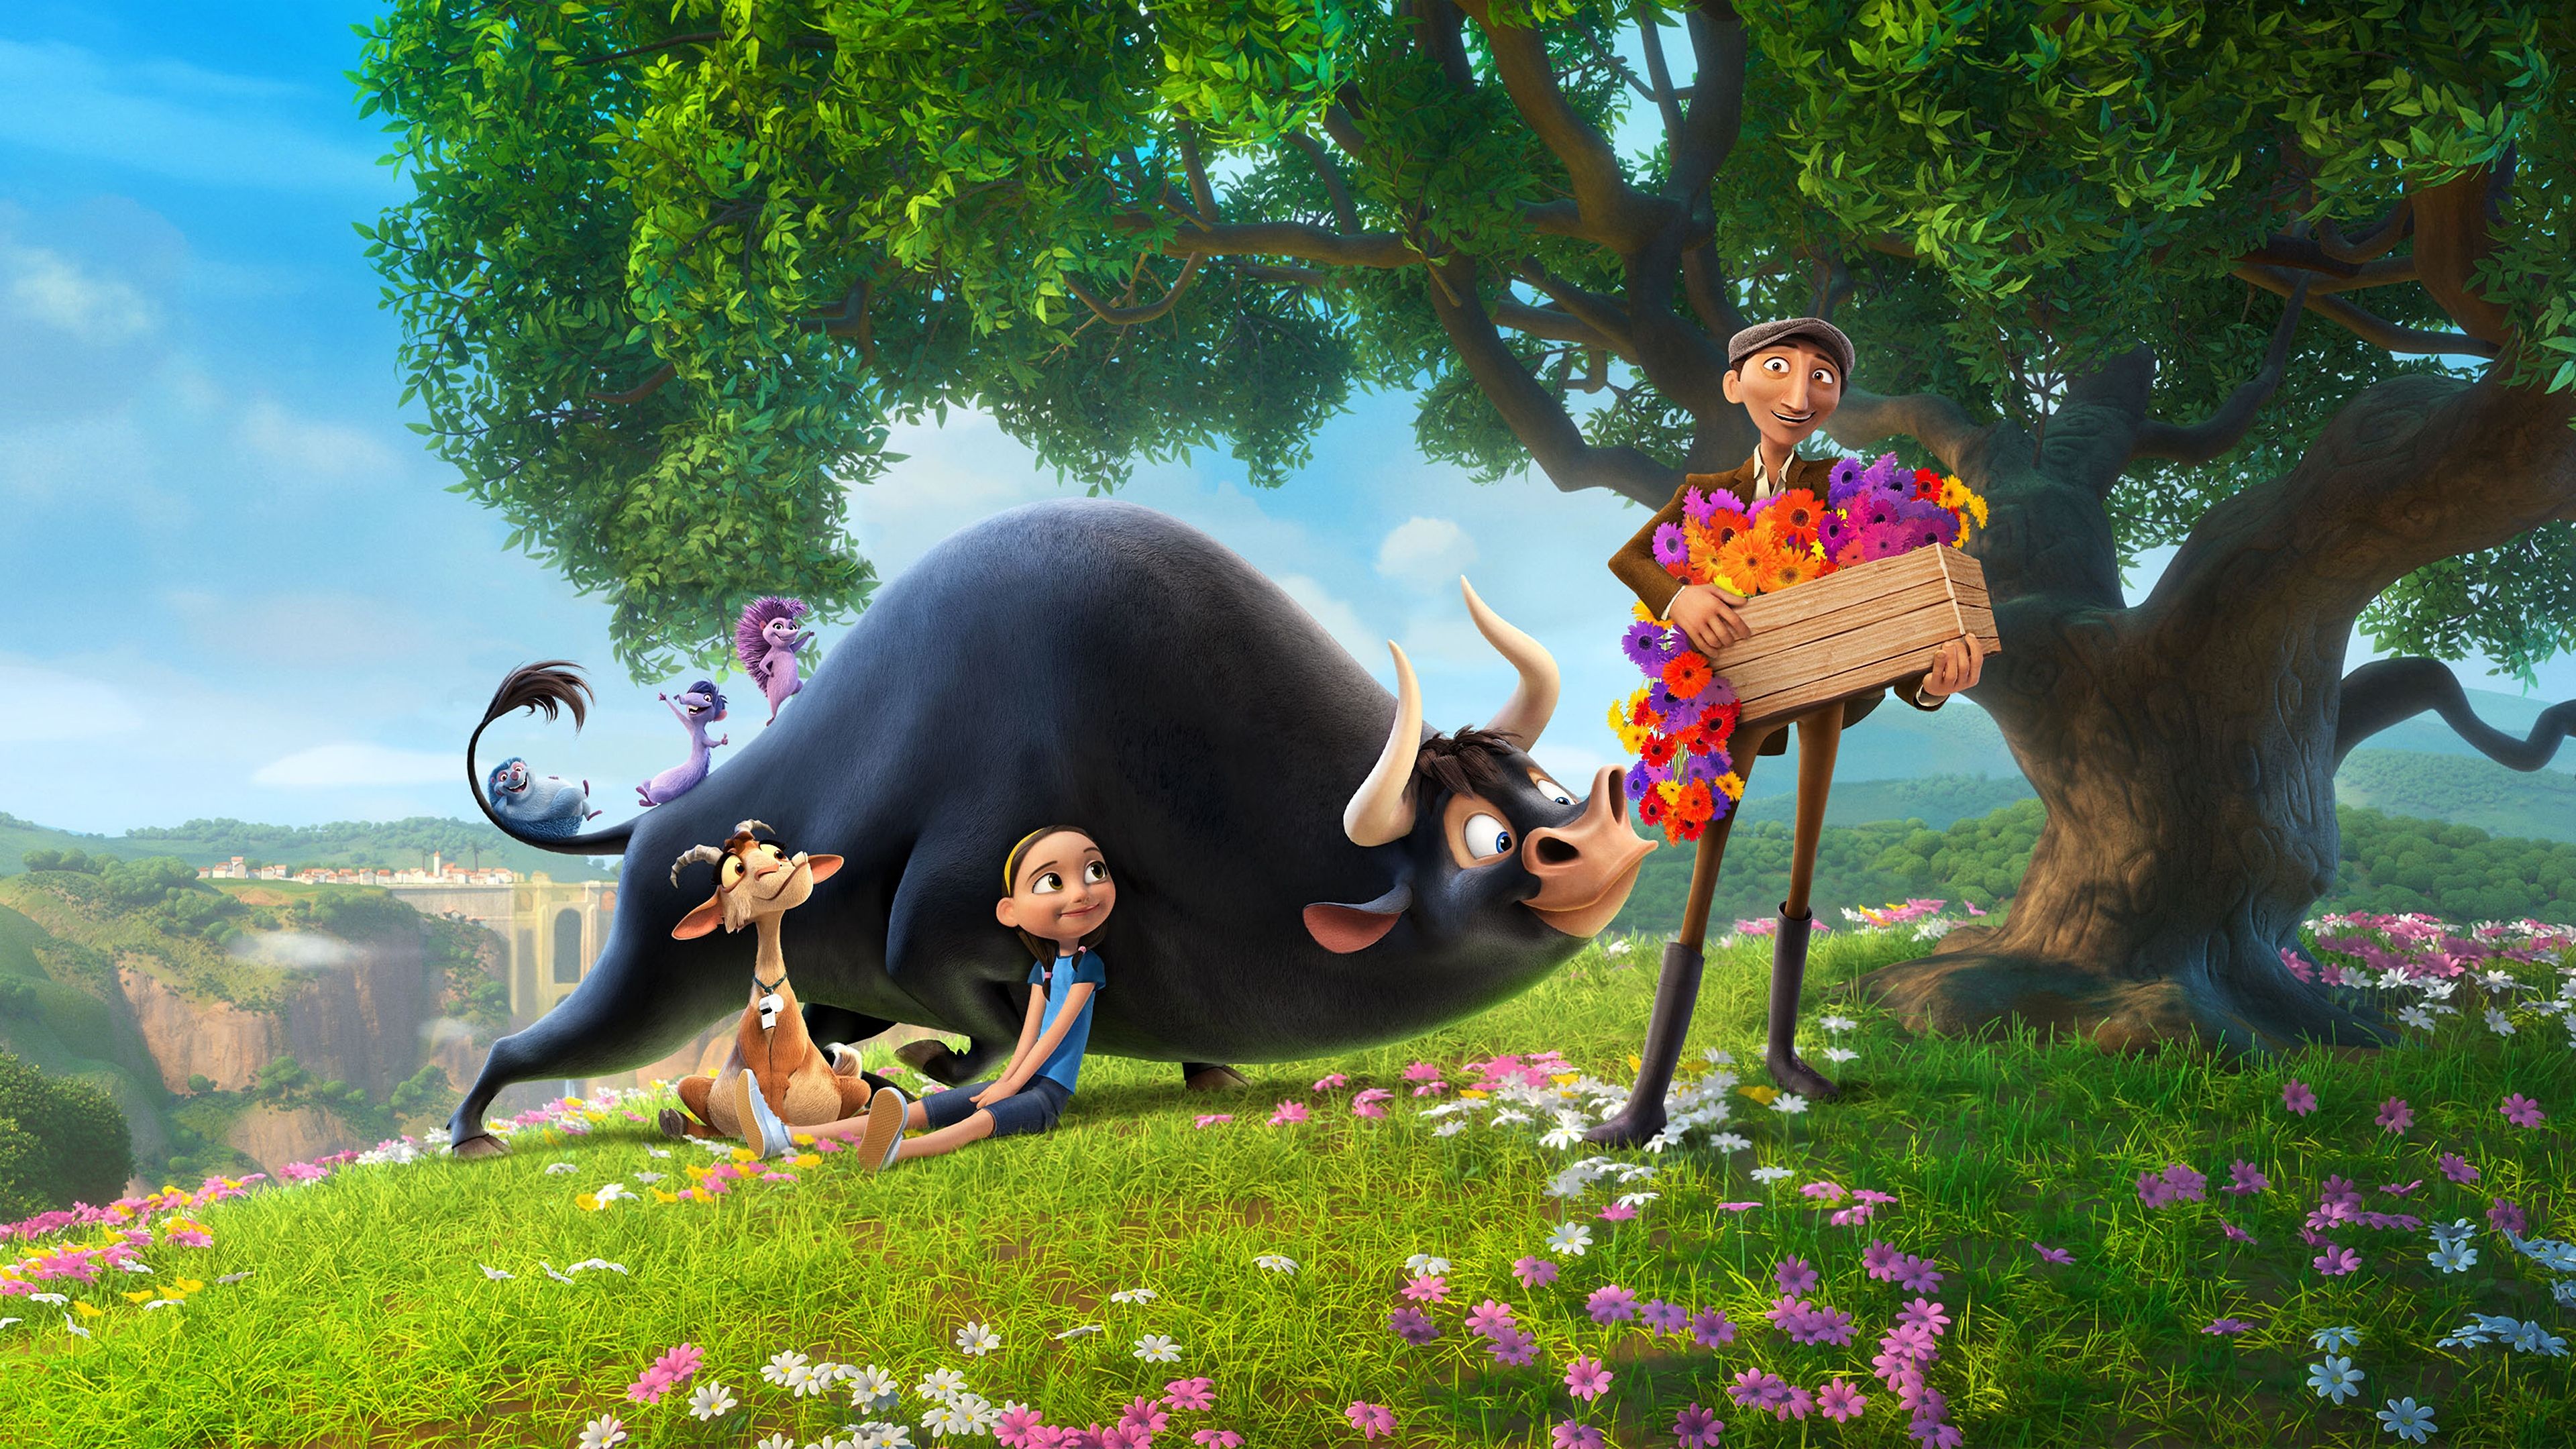 Ferdinand Blue Sky Studios Animated Movie 4k, HD Movies, 4k Wallpaper, Image, Background, Photo and Picture